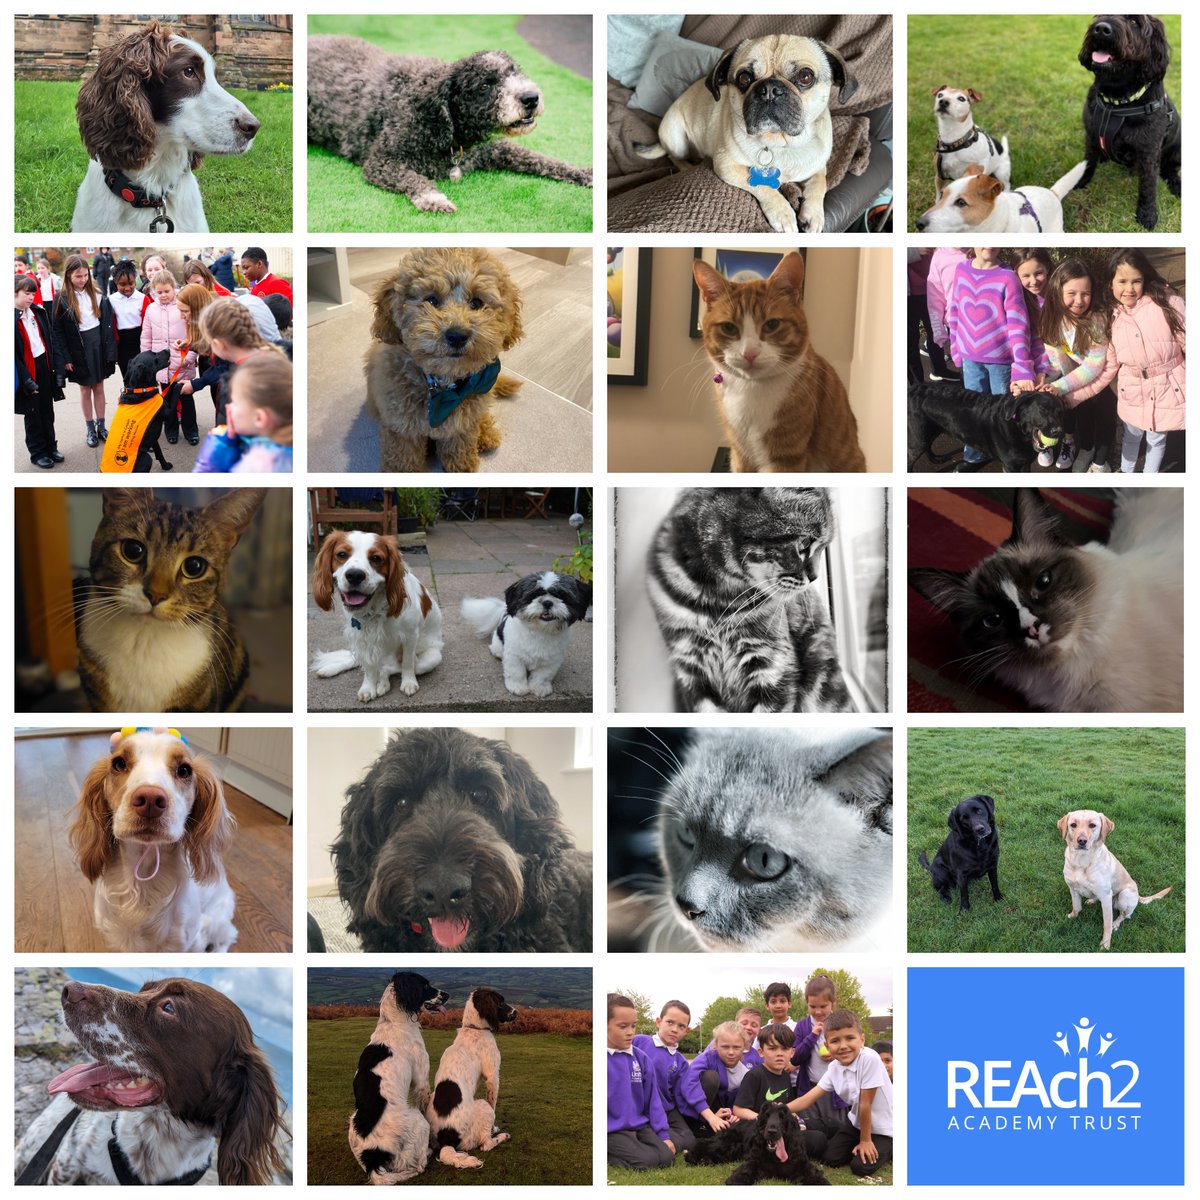 Thank you to all our staff and schools for submitting photos for National Pet Day. Pets teach children empathy and compassion. When children care for animals, they better understand their needs and emotions. Read our latest article - loom.ly/i0bdGEY